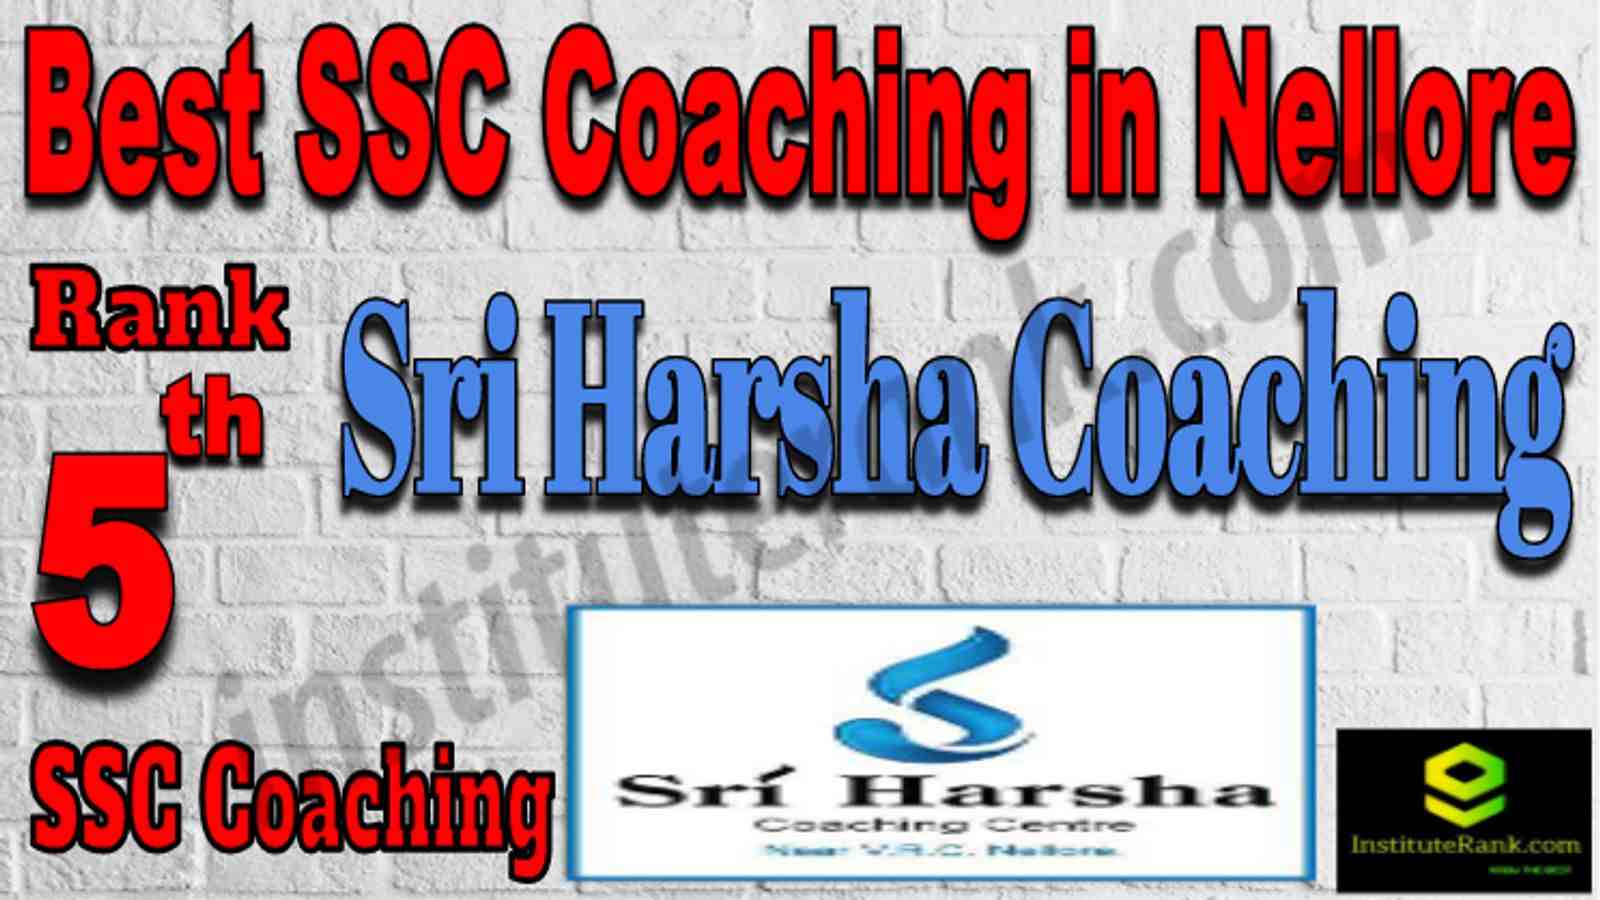 Rank 5 Best SSC Coaching in Nellore